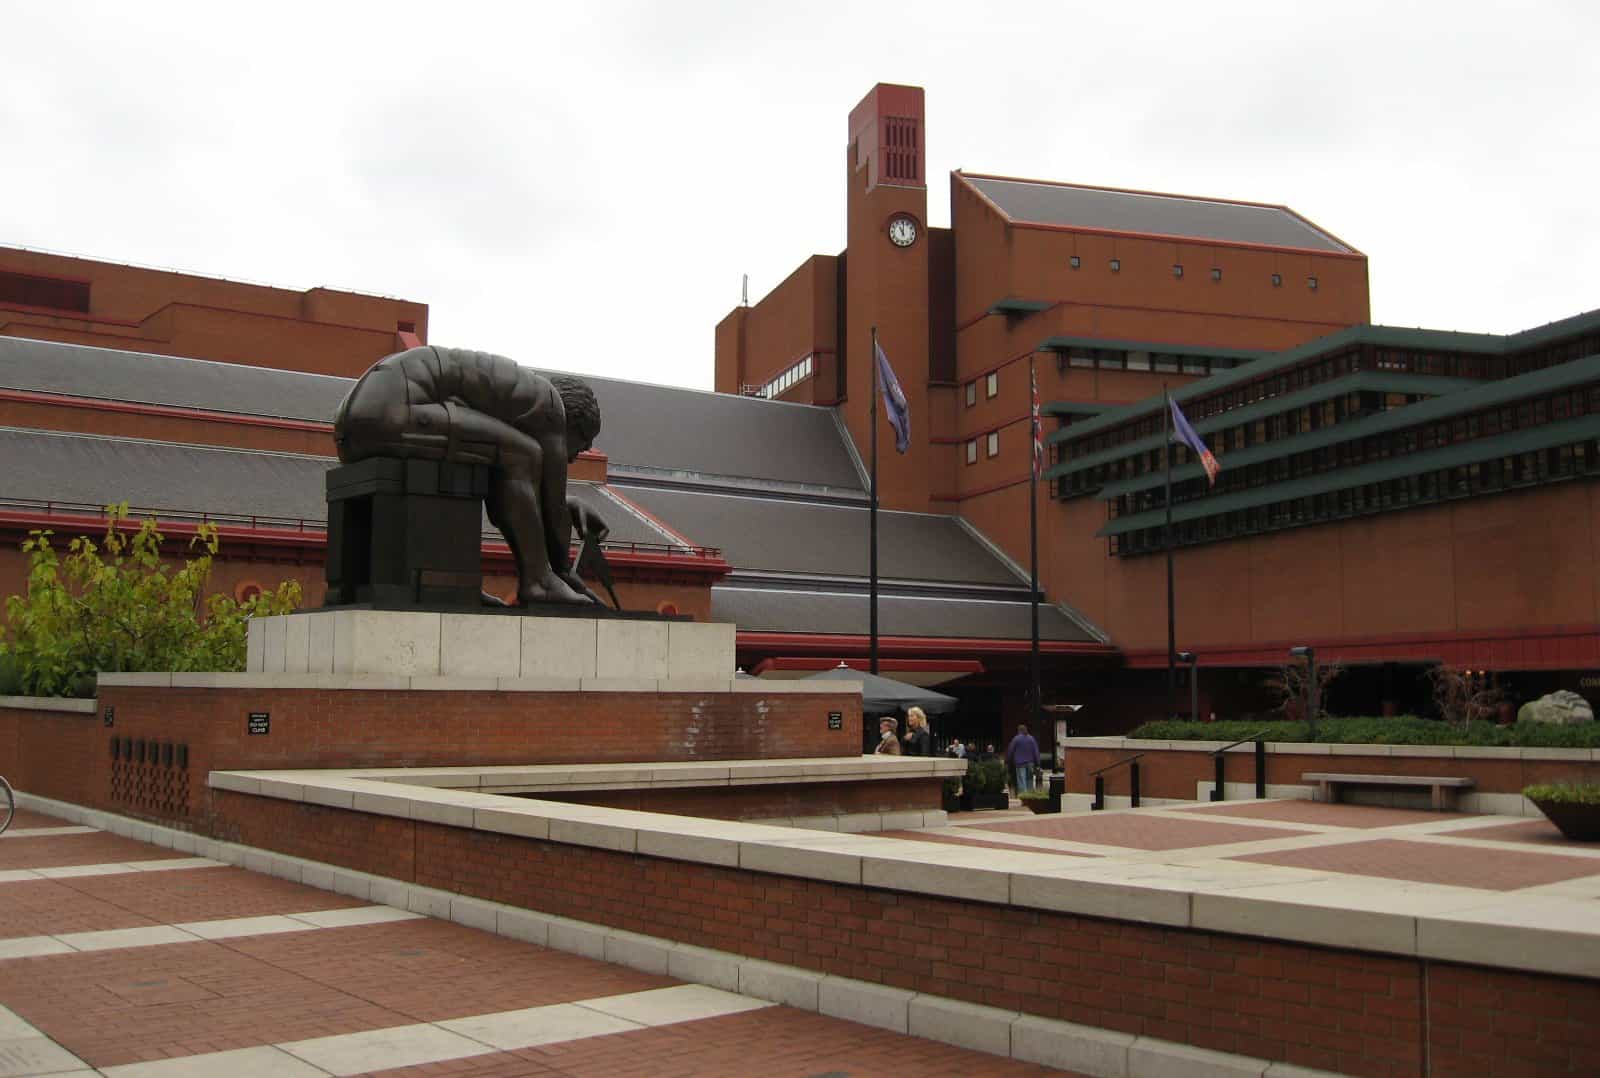 National library of United Kingdom - The British Library